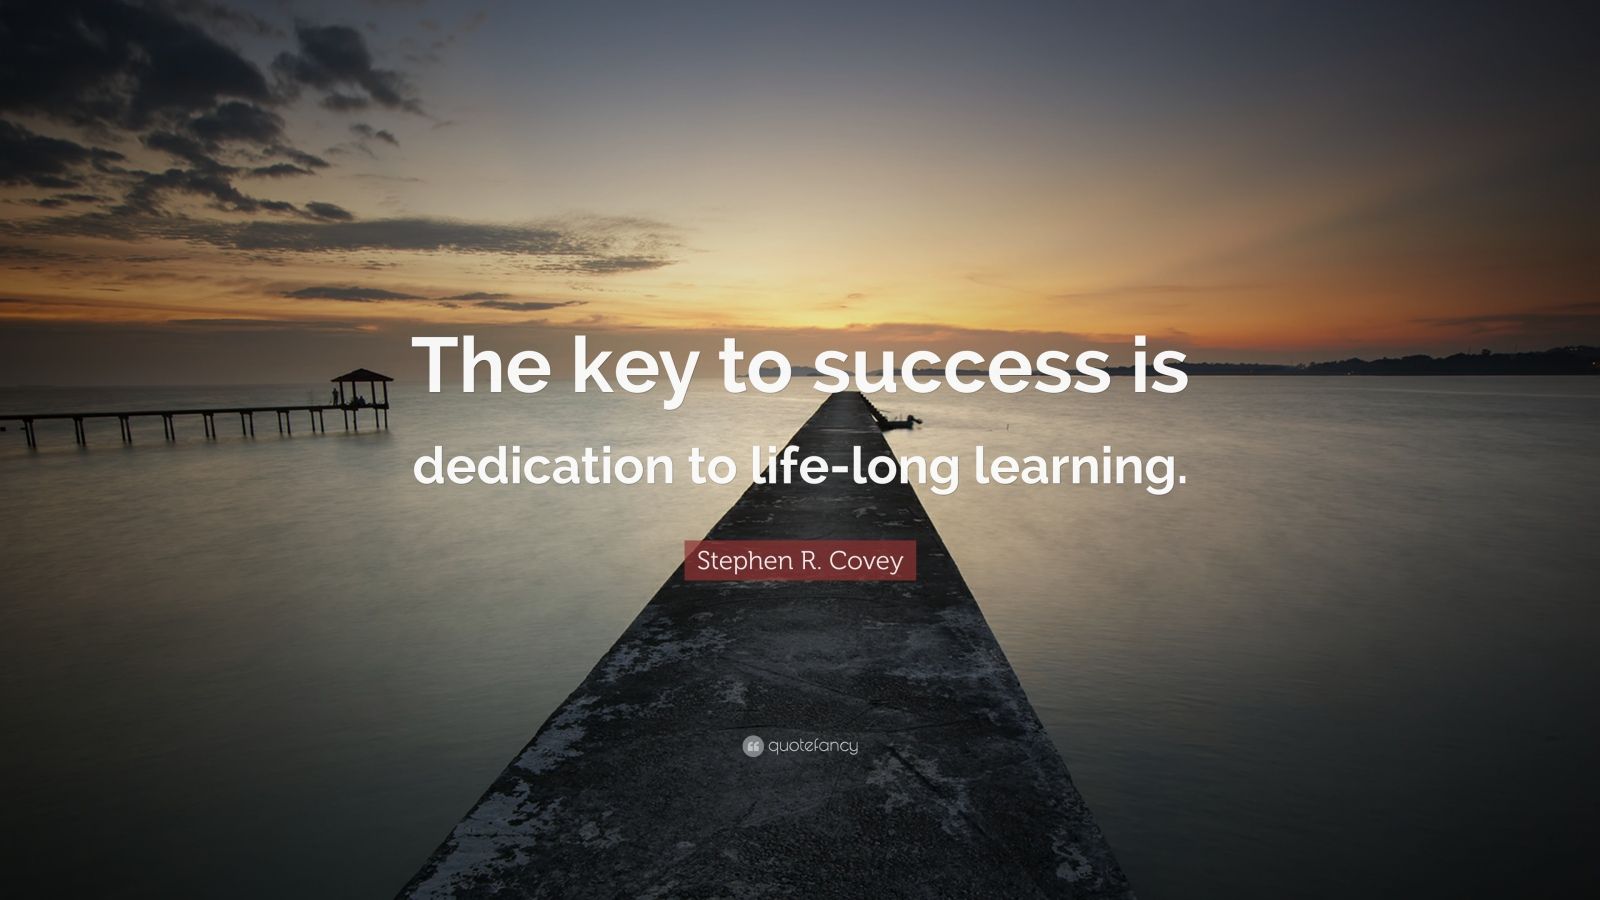 Stephen R. Covey Quote: “The key to success is dedication to life-long